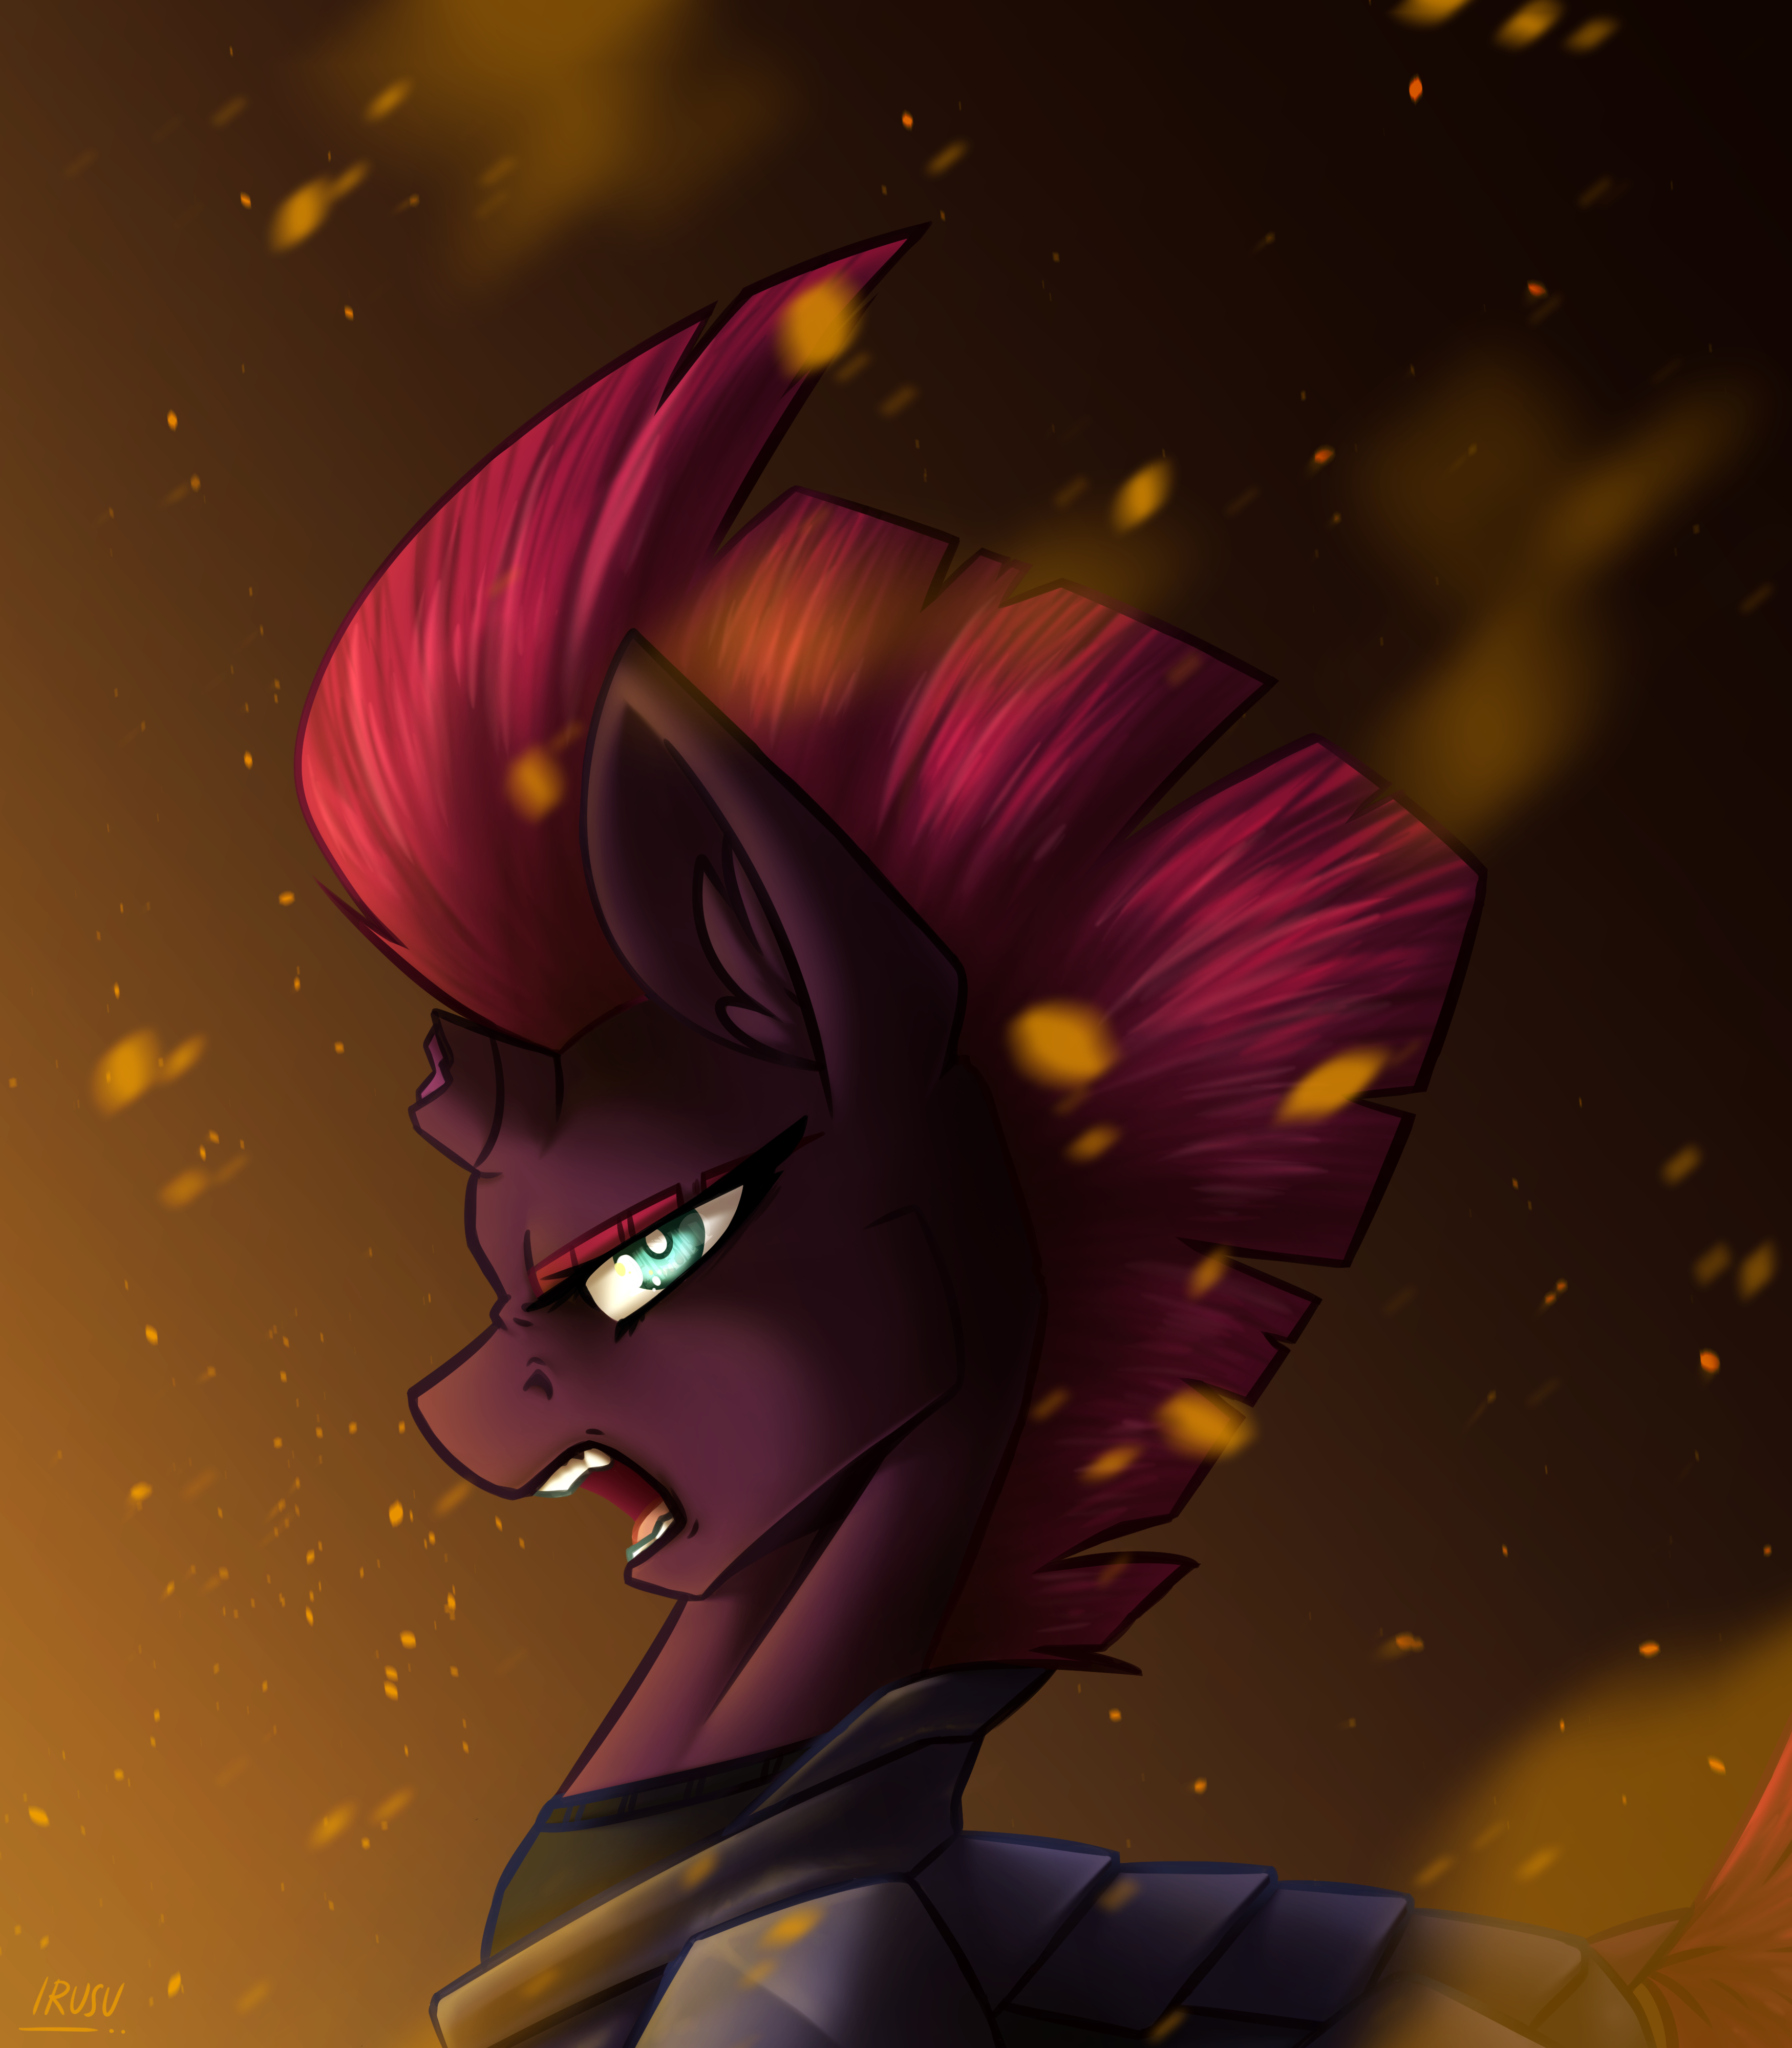 [Obrázek: open_up_your_eyes_by_lrusu-dcheue7.png]